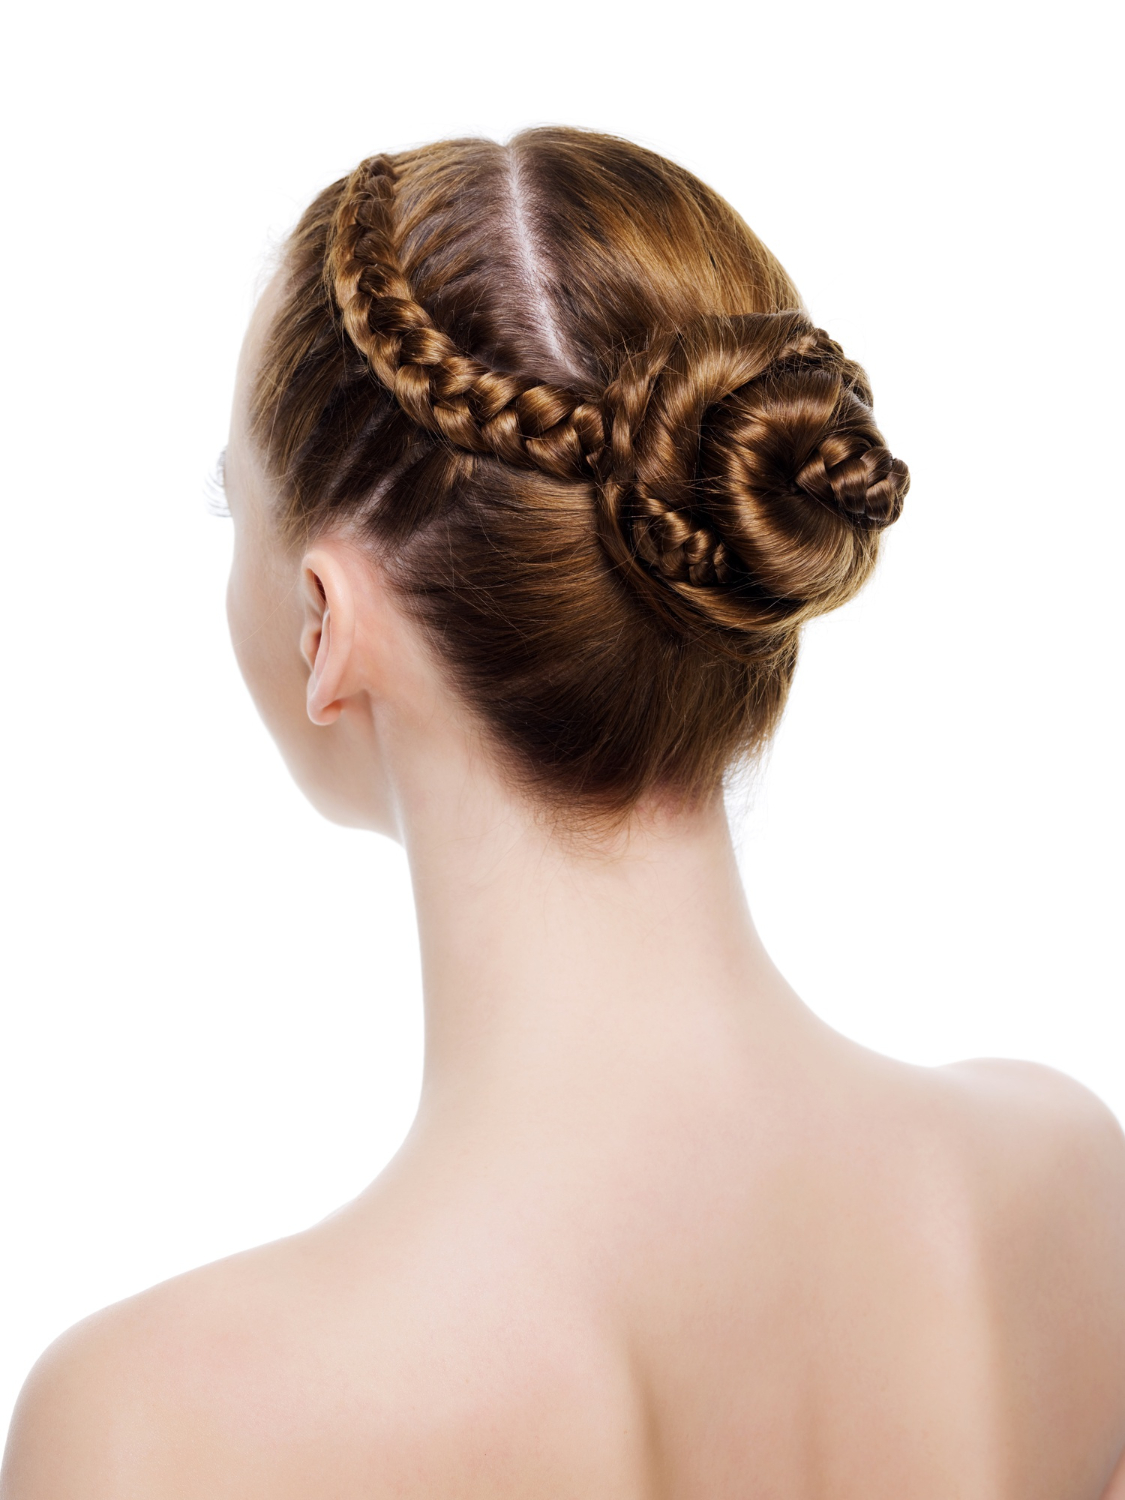 Easy Greek Hairstyles to Try on Any Occasion